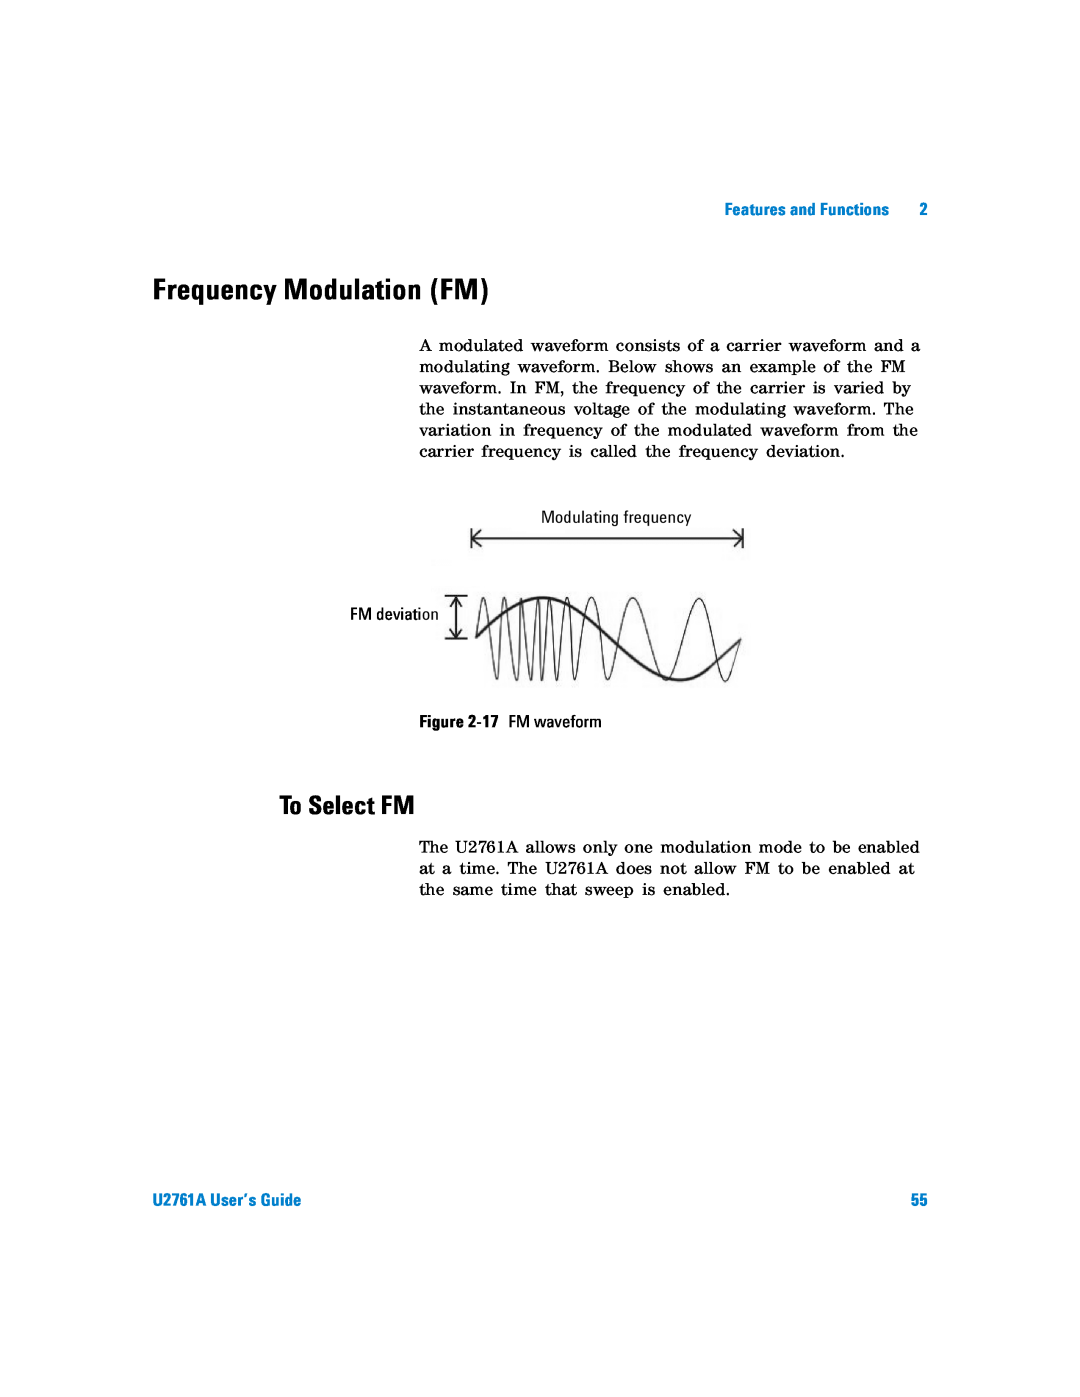 Agilent Technologies manual Frequency Modulation FM, To Select FM, U2761A User’s Guide 